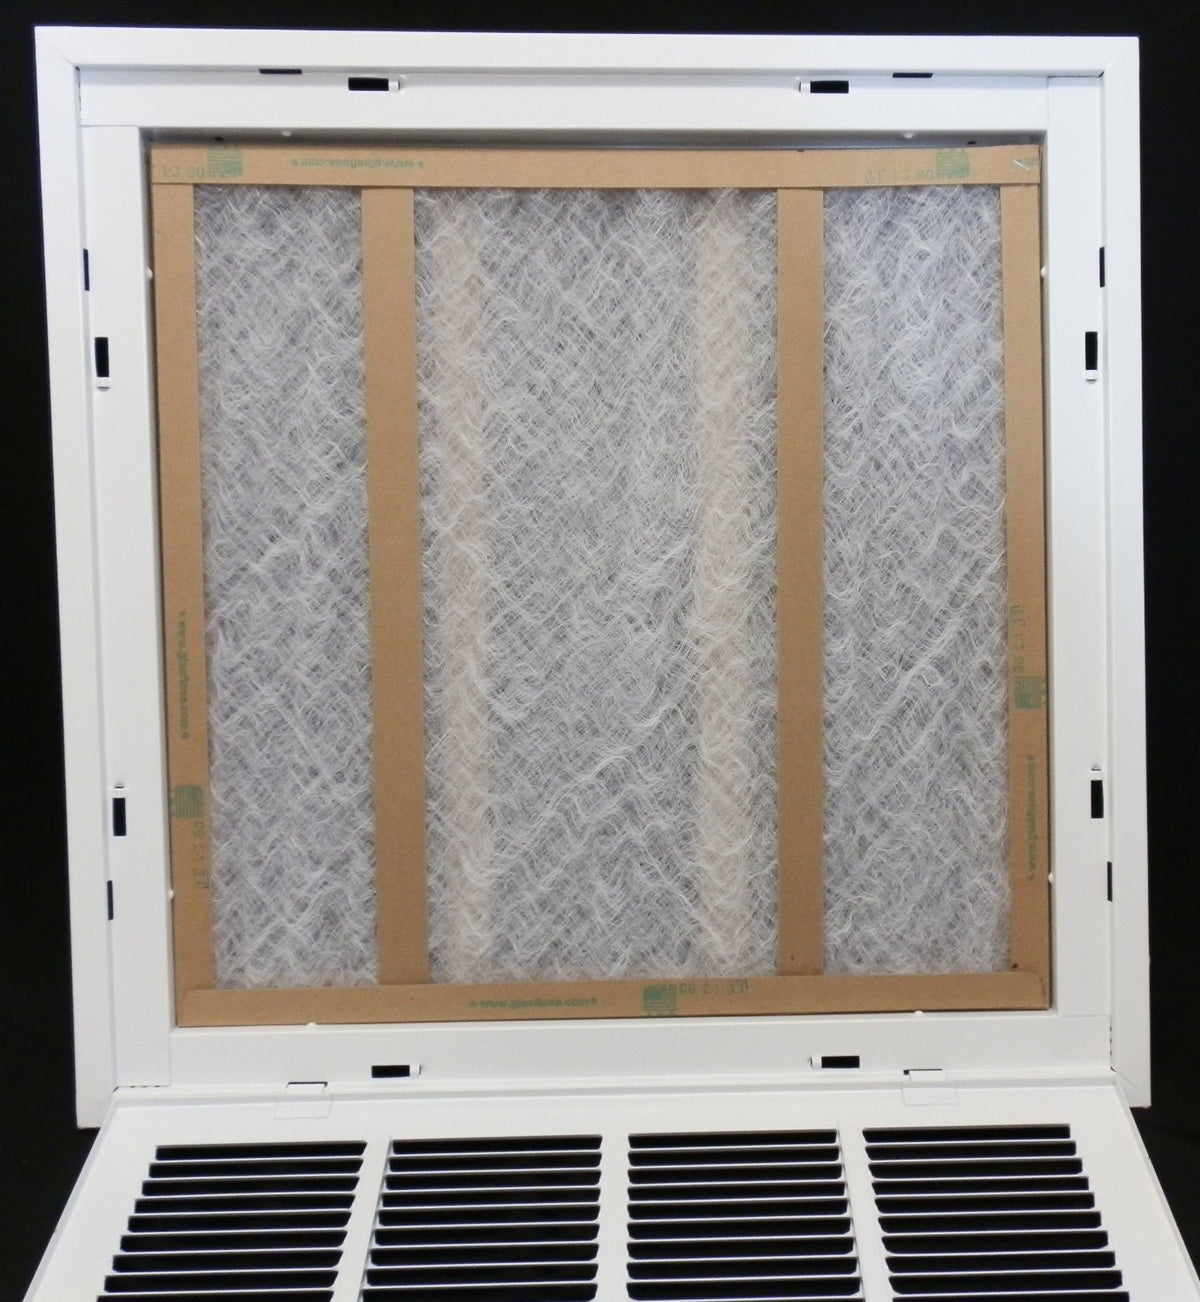 12&quot; X 20&quot; Steel Return Air Filter Grille for 1&quot; Filter - Removable Frame - [Outer Dimensions: 14 5/8&quot; X 22 5/8&quot;]